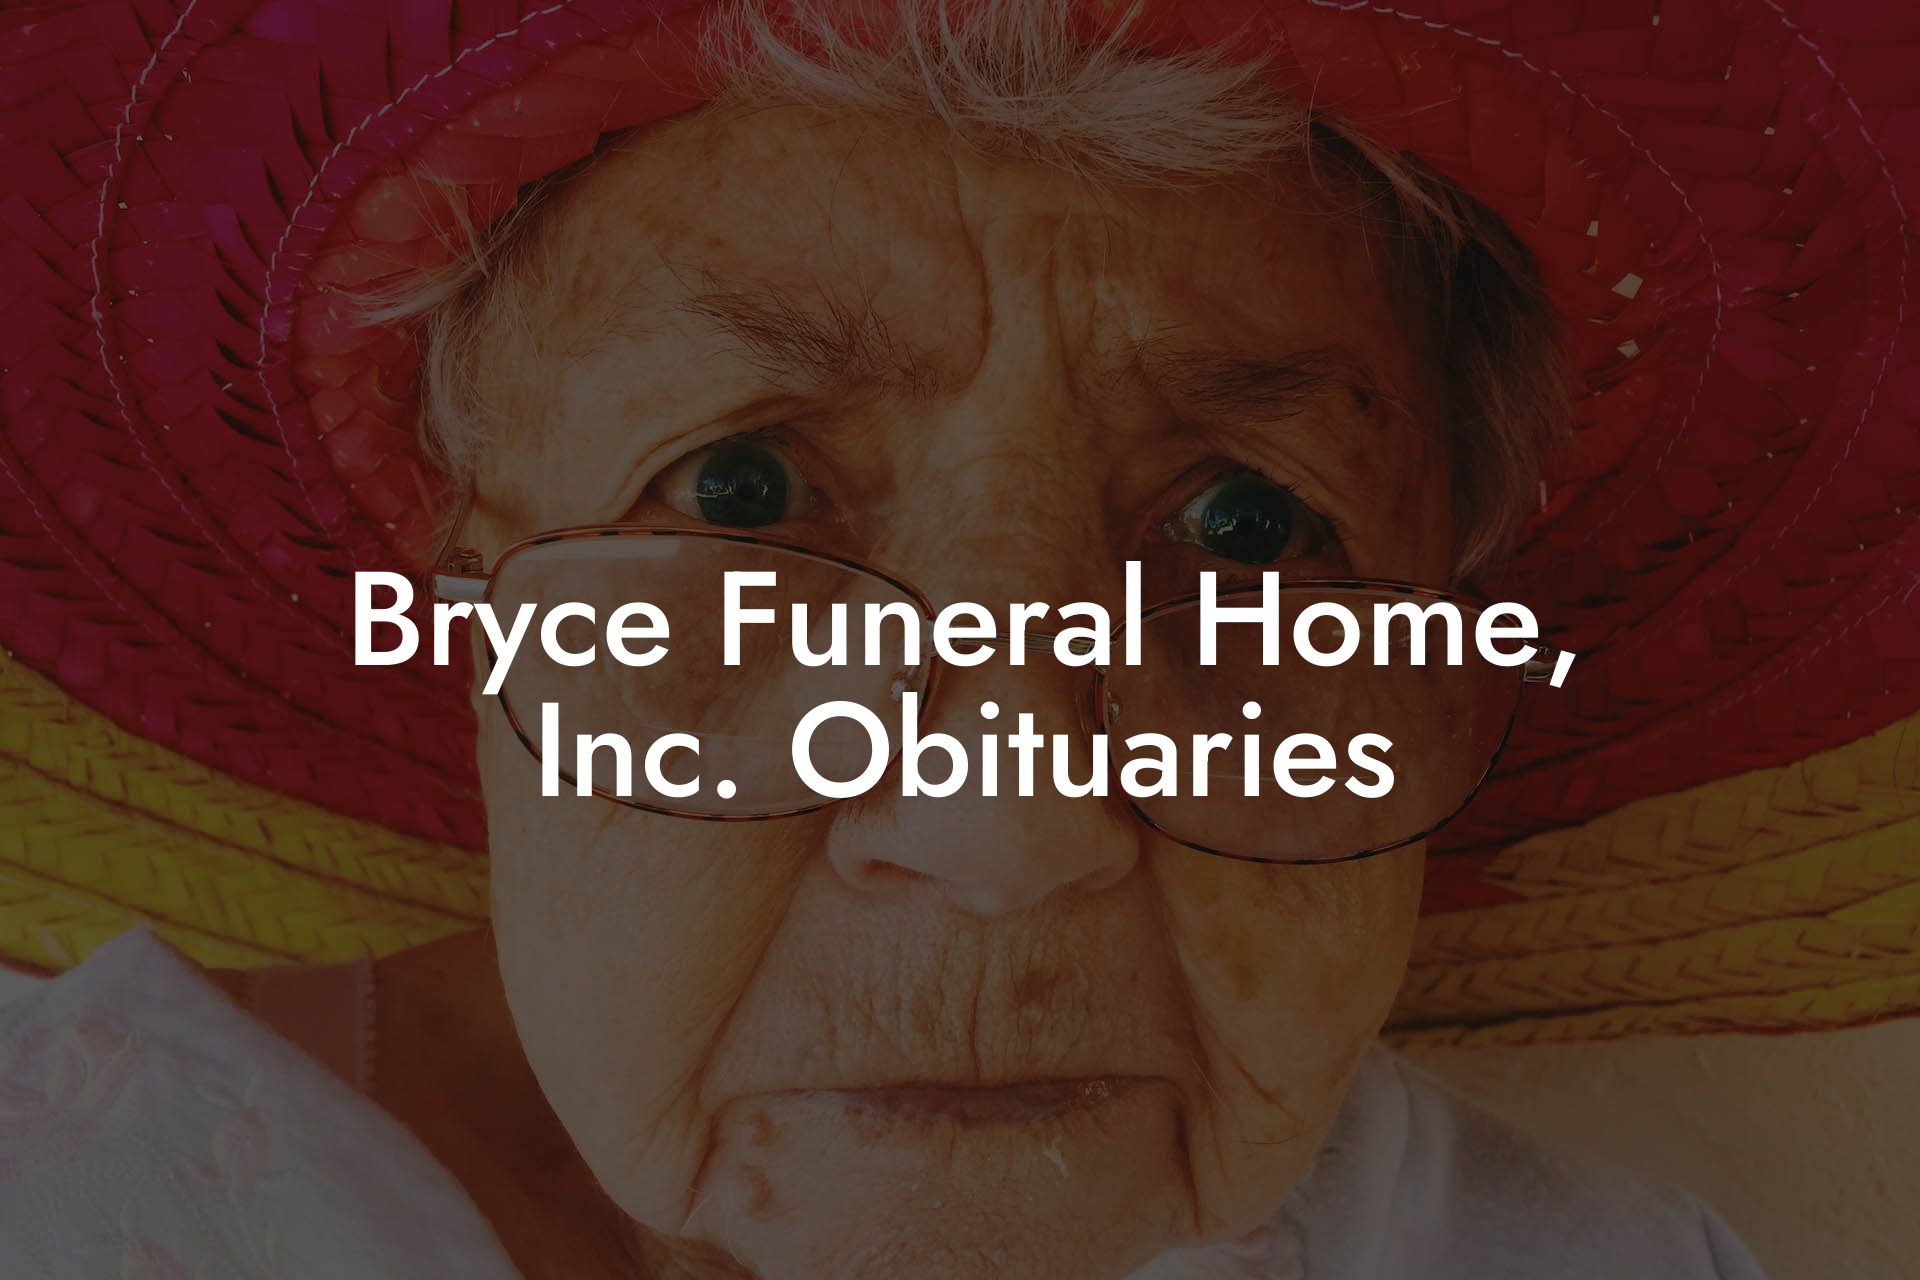 Bryce Funeral Home, Inc. Obituaries